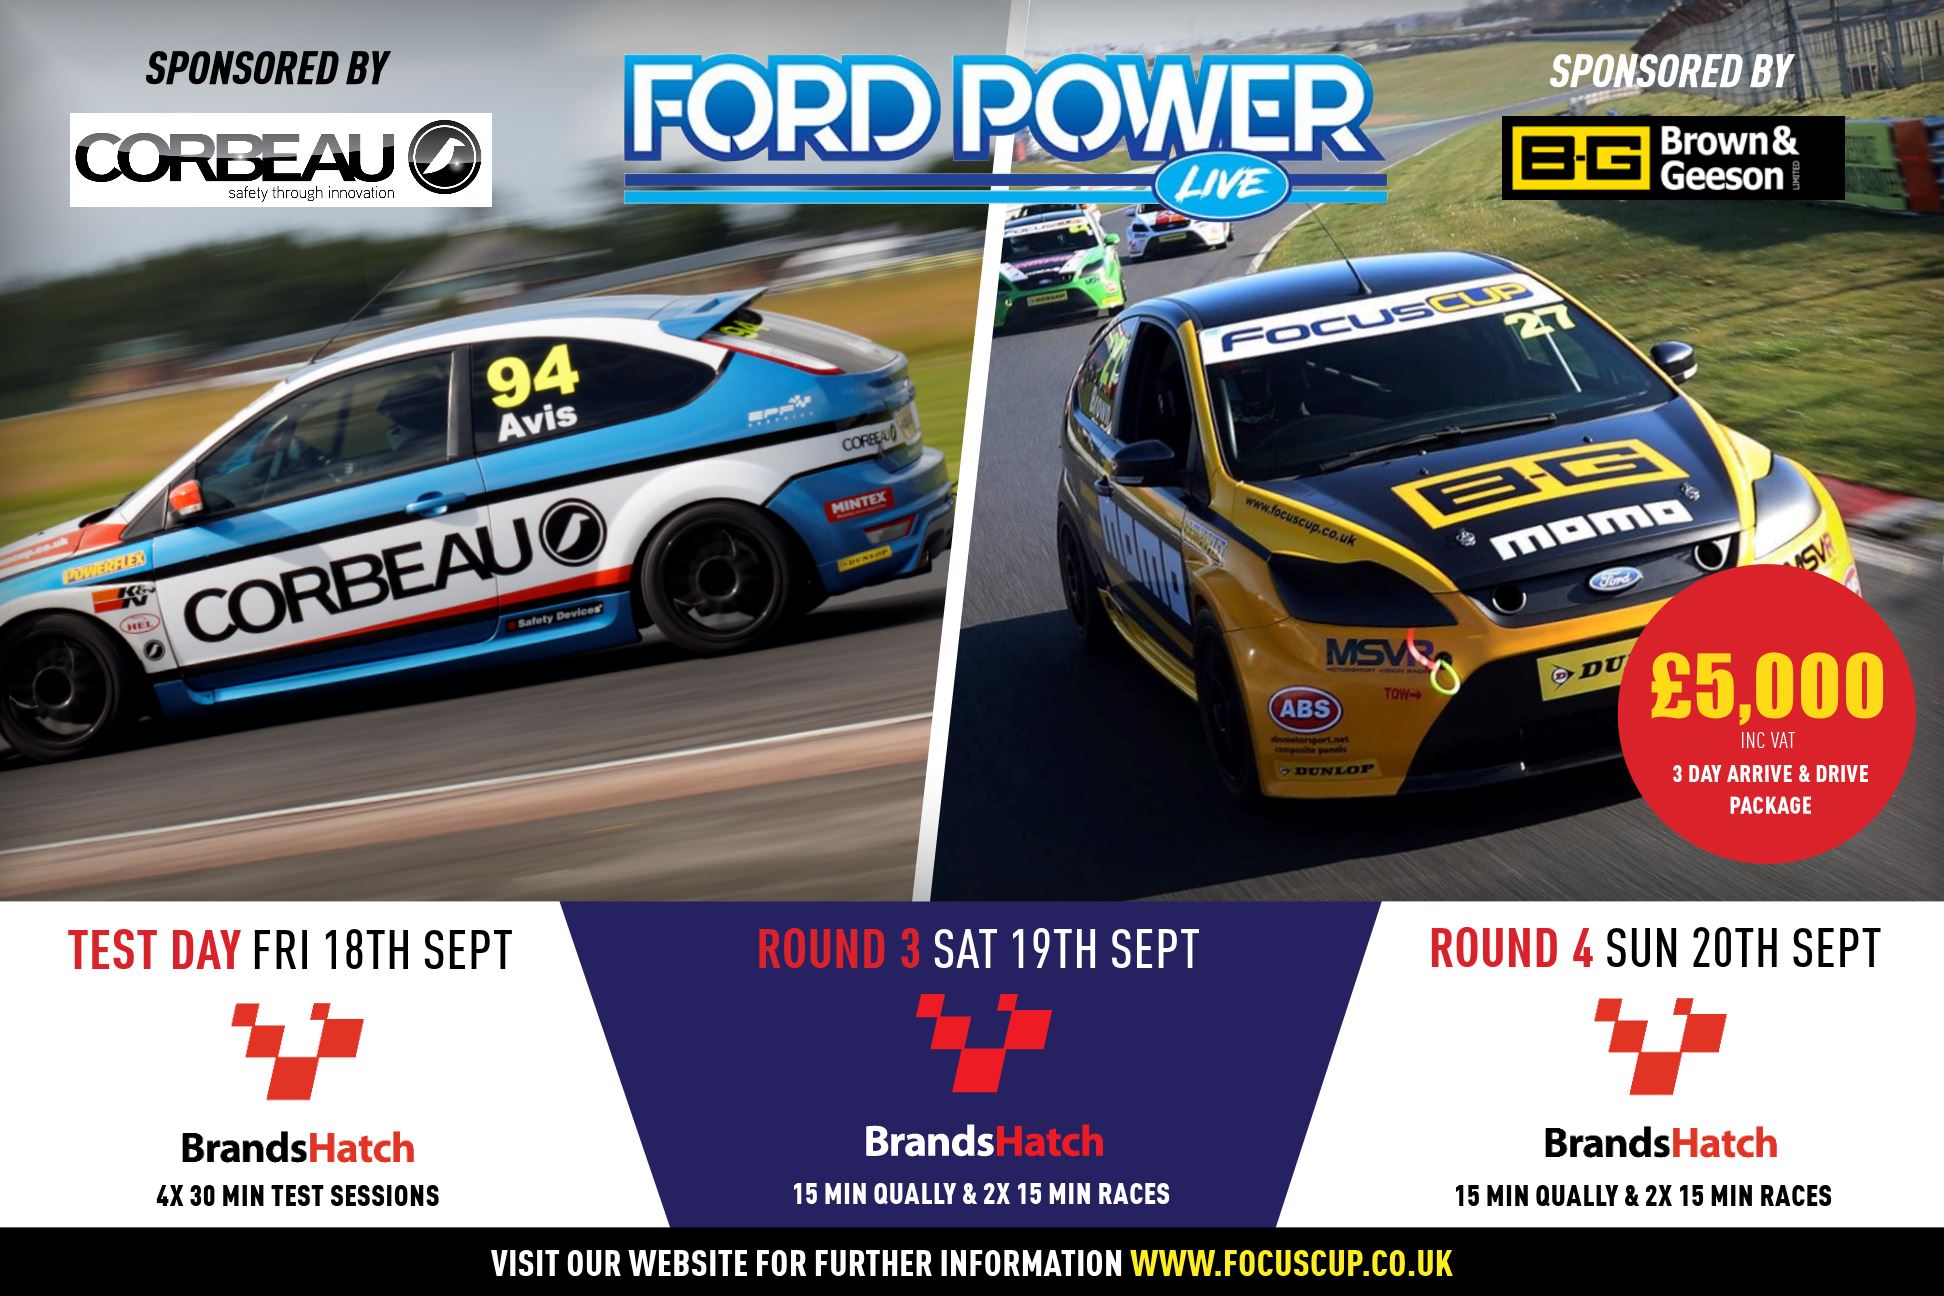 Ford Power Live Event Round 3 & 4